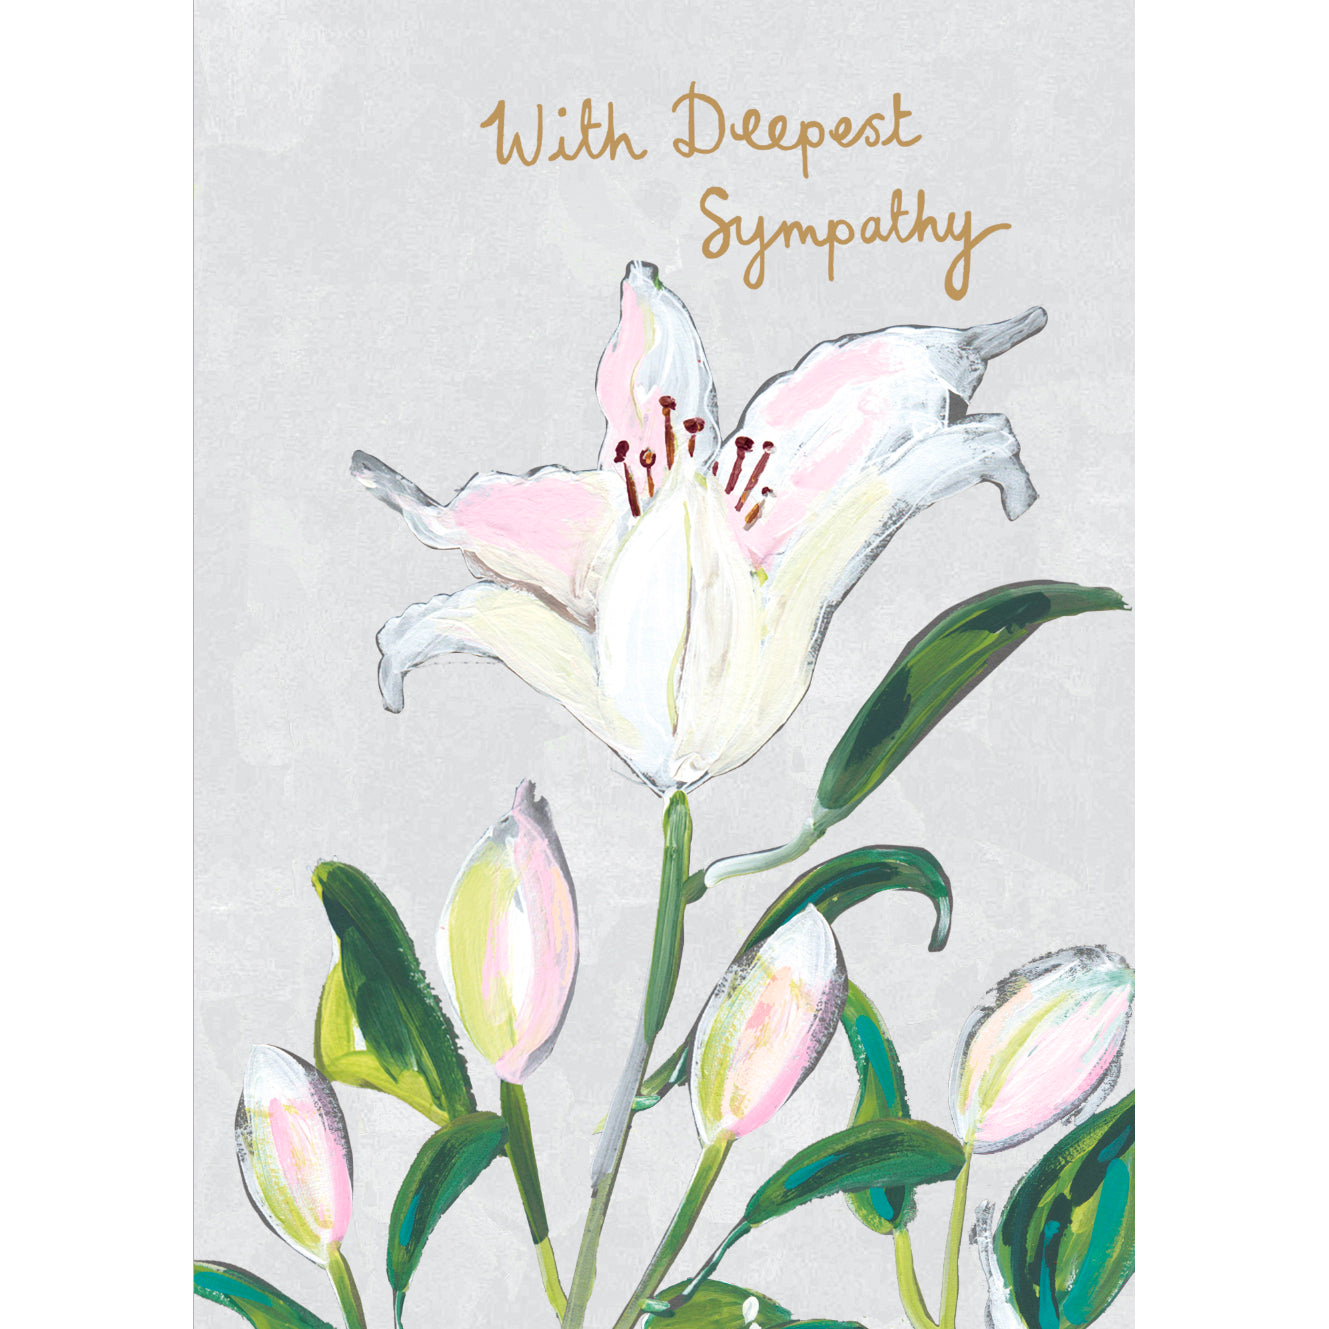 Painted Lily Deepest Sympathy Card from Penny Black